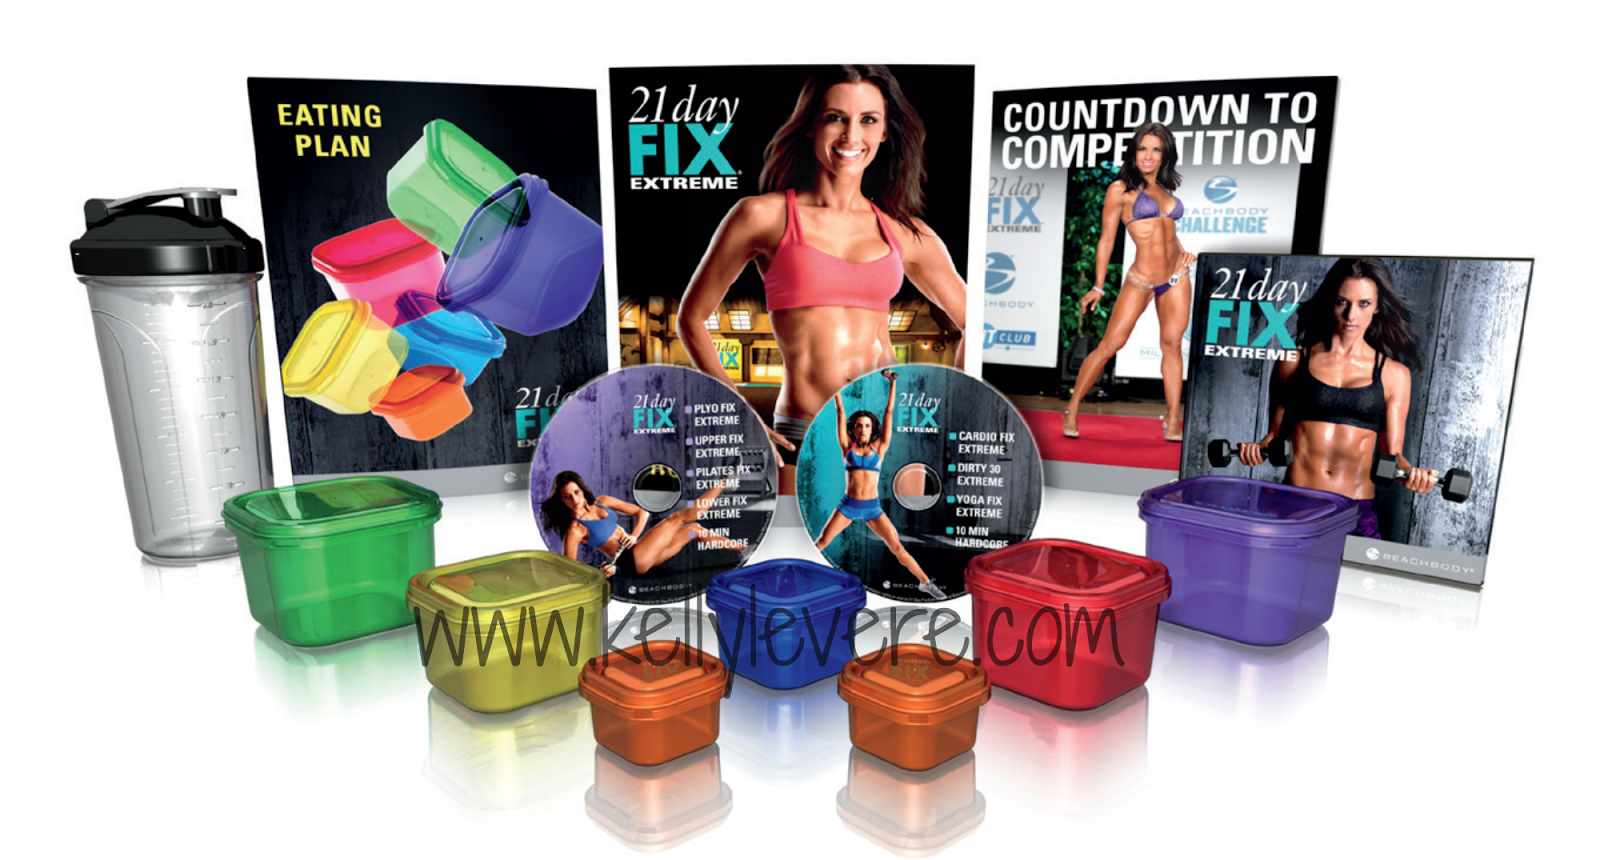 Learning to Love Me: 21 Day Fix and 21 Day Fix Extreme Challenge Group